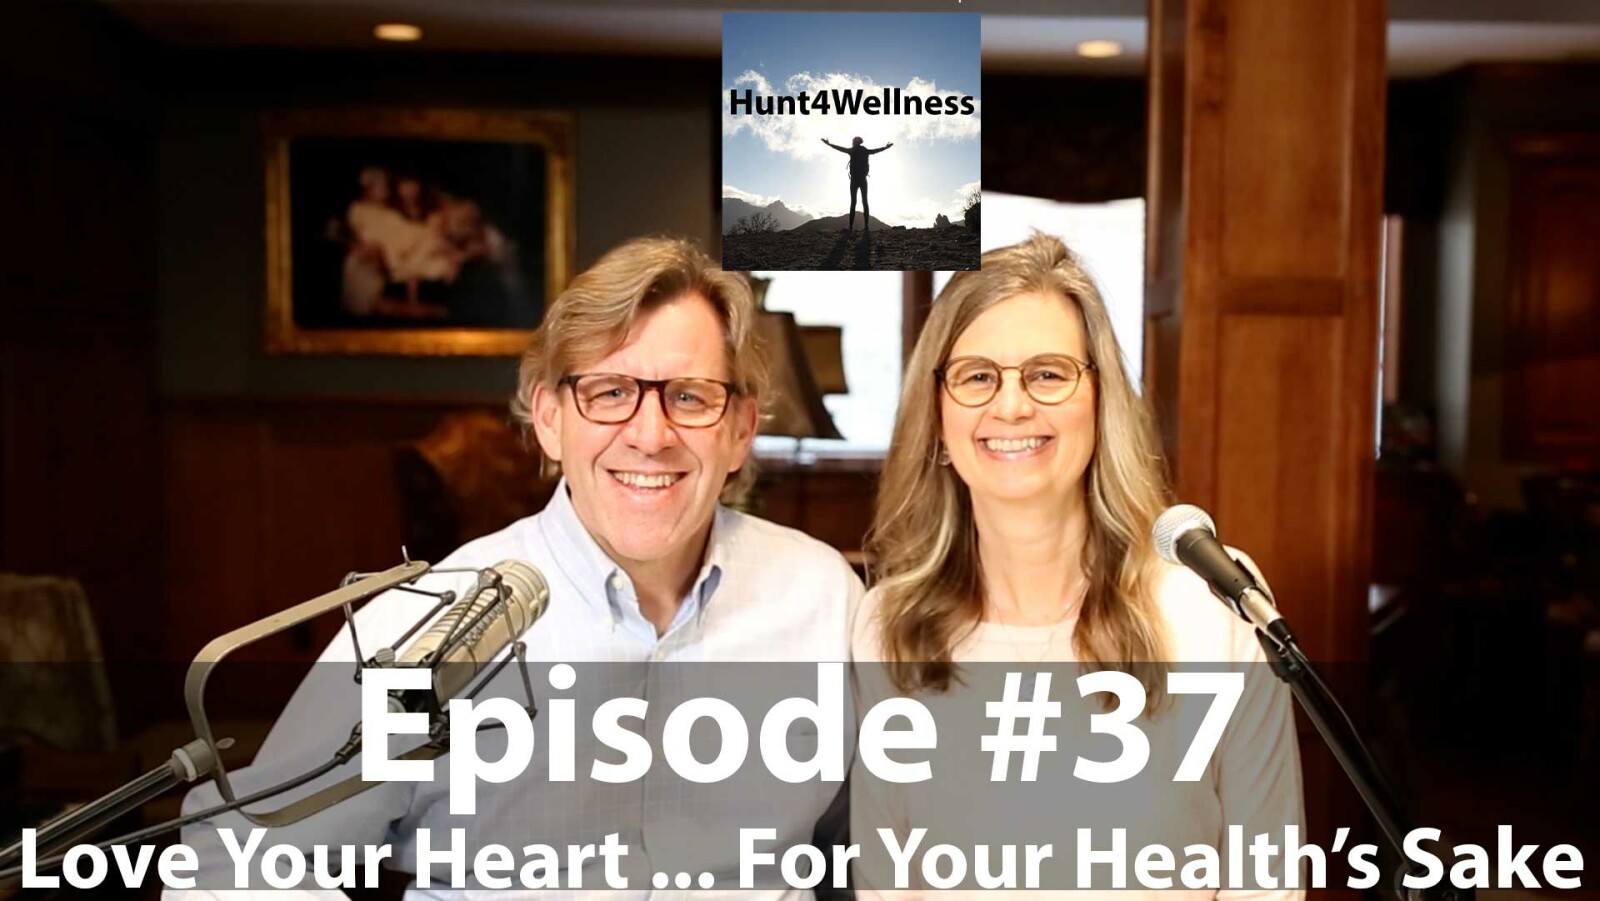 Episode #37 - Love Your Heart... For Your Health's Sake